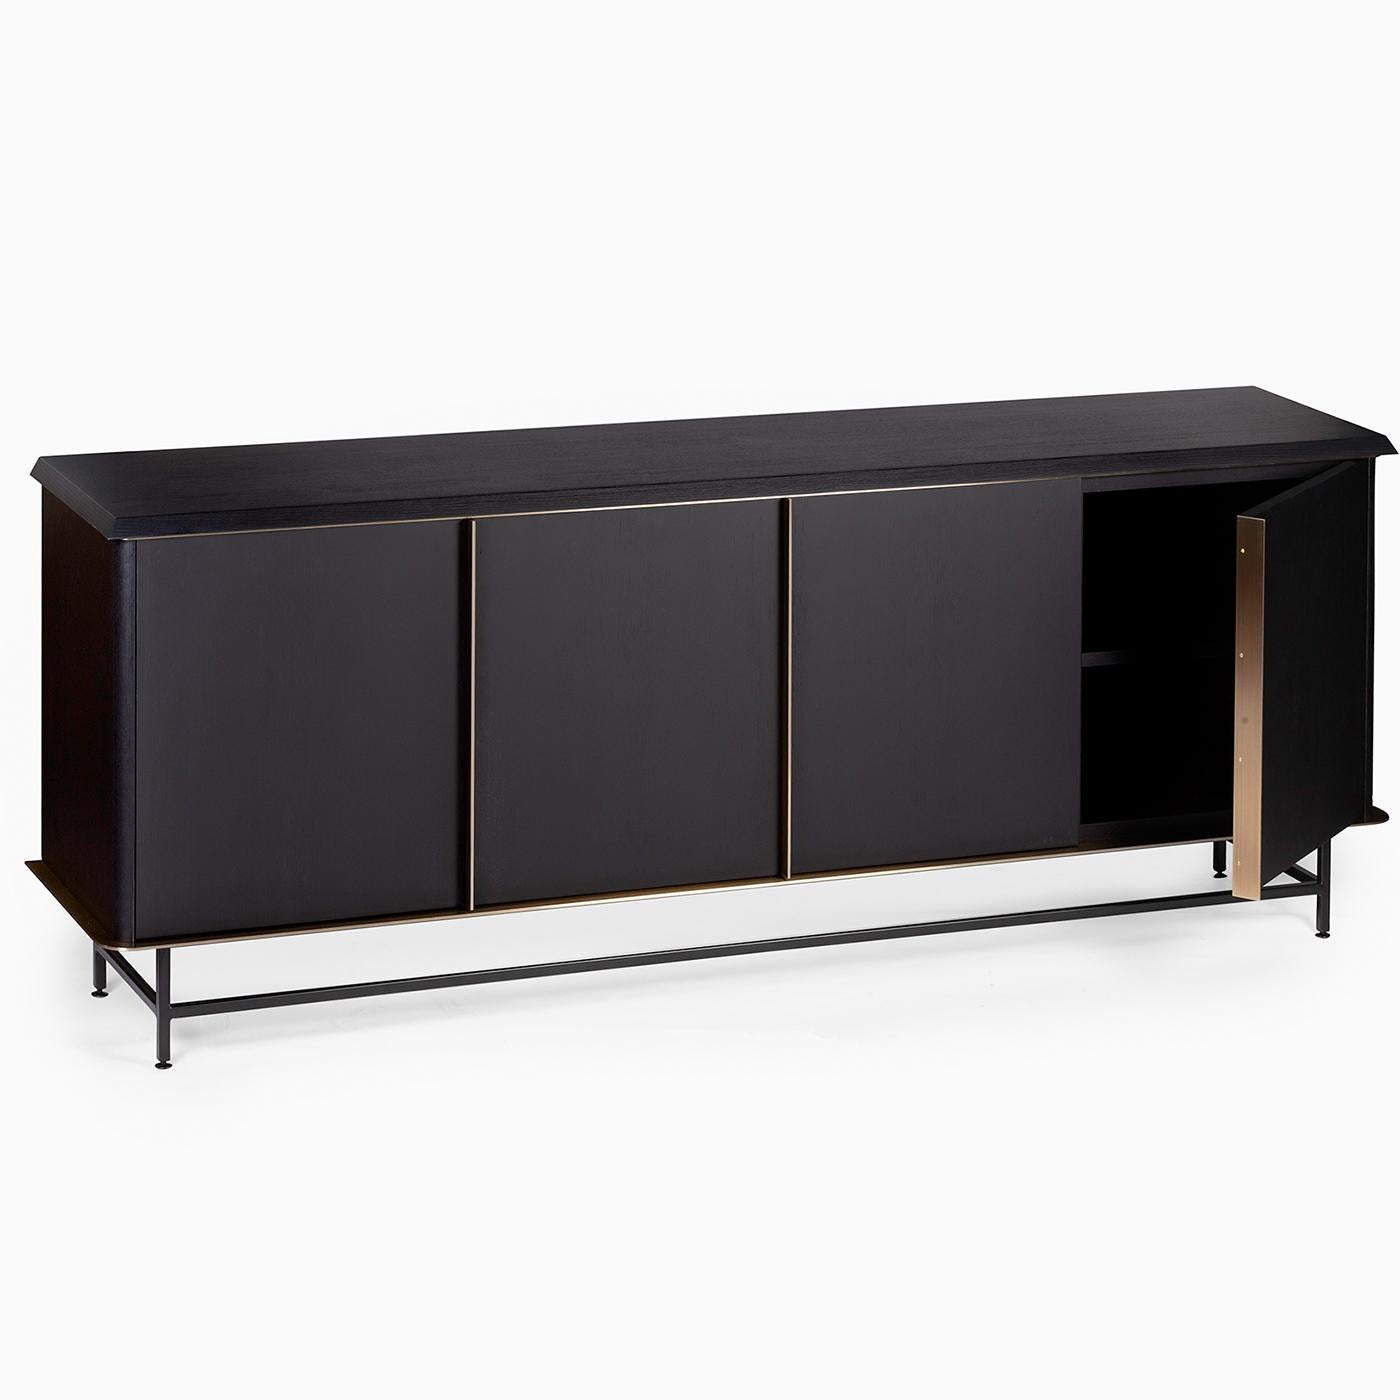 Clean, essential lines define this minimalist sideboard of Nordic inspiration. Boasting a four-door profile, it is handcrafted of black-lacquered ash and features a linear lacquered iron base. The doors are enriched with burnished brass-finished